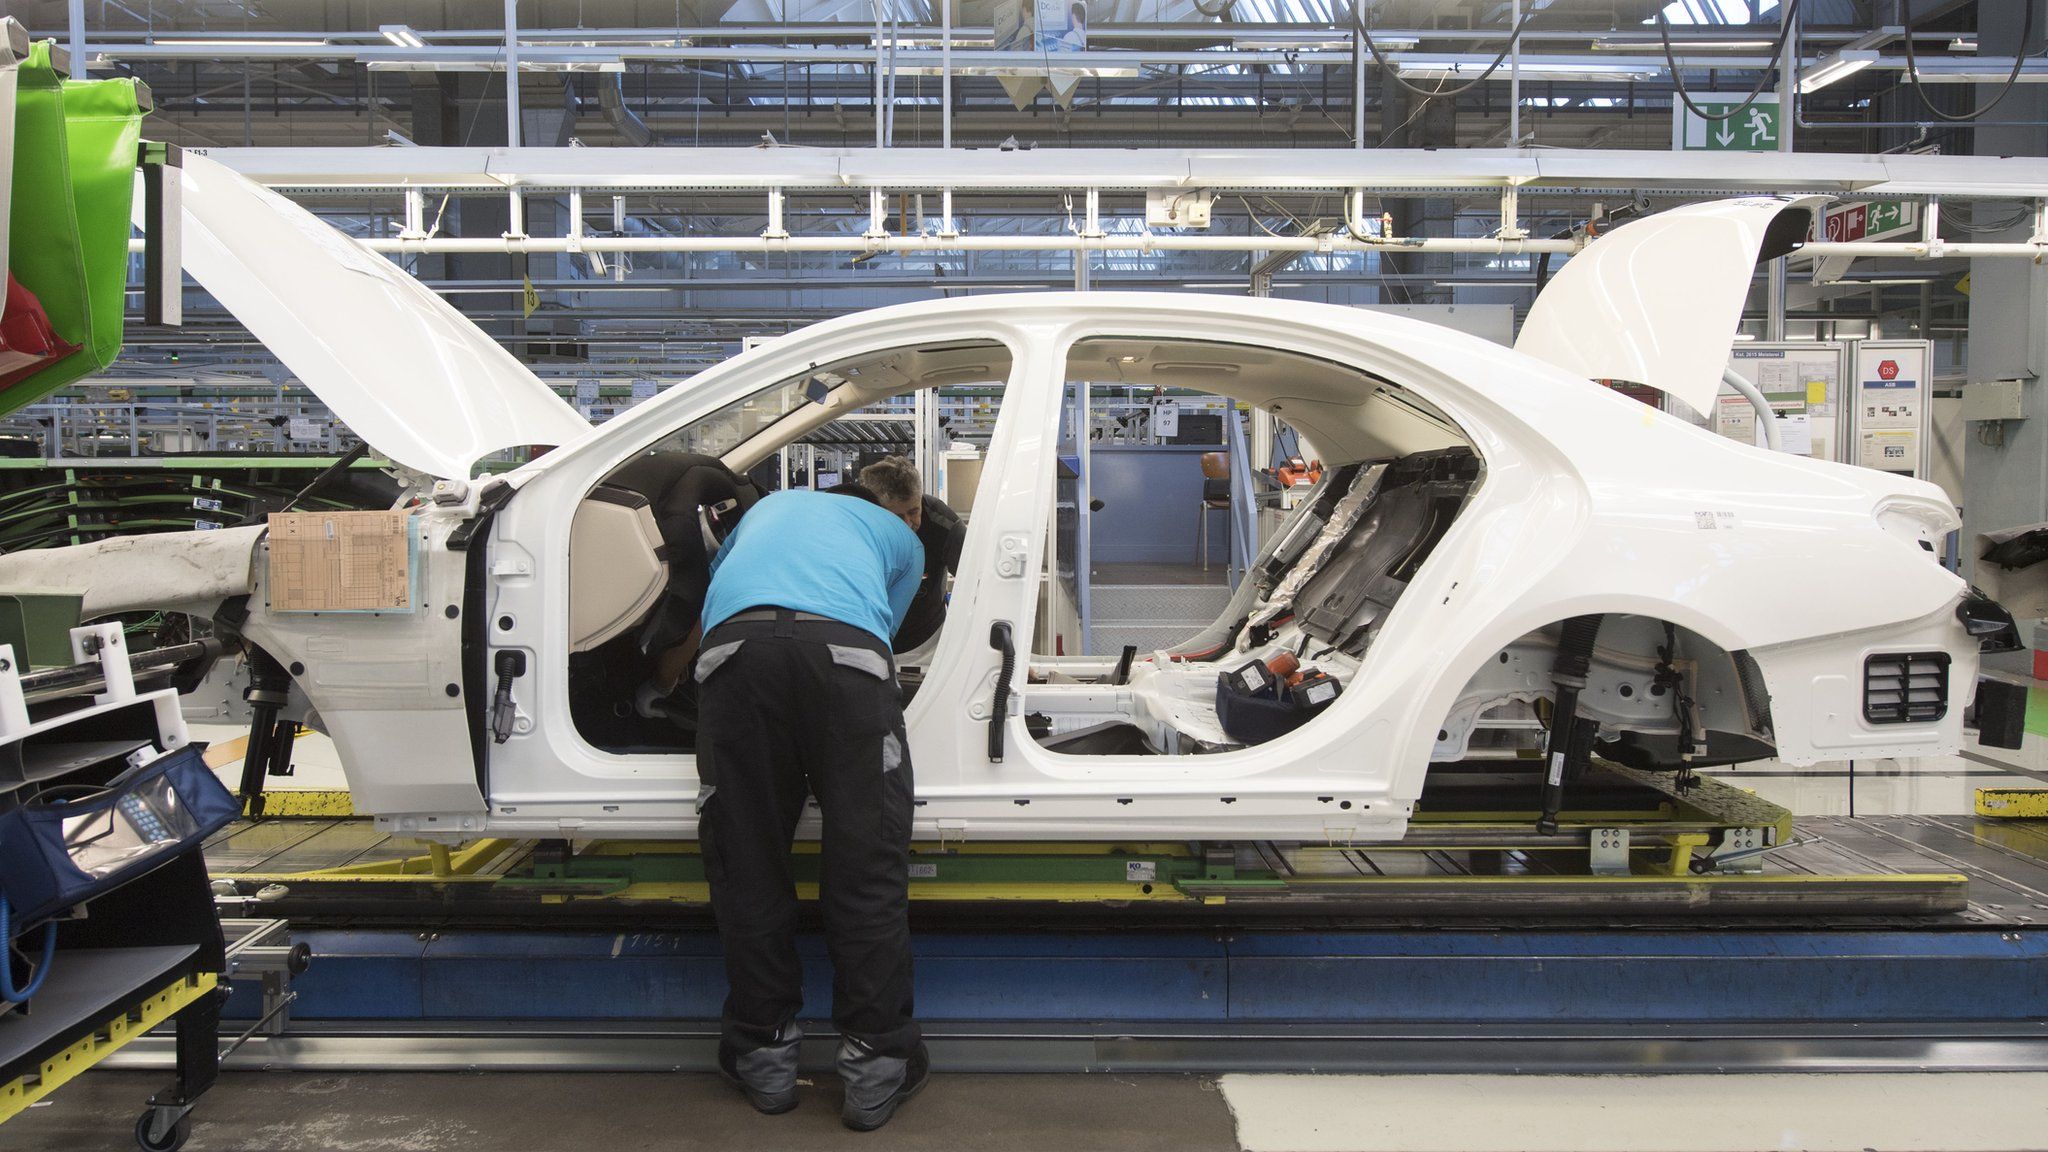 An employee works on a Mercedes-Benz S-Class car on the assembly line on January 24, 2018 at a plant of the Stuttgart-based luxury carmaker Mercedes-Benz in Sindelfingen, southwestern Germany. Confidence among investors in Germany surged in January, a closely-watched survey showed on January 23, 2018, in a further sign that a growth streak in Europe's powerhouse could have much further to run.